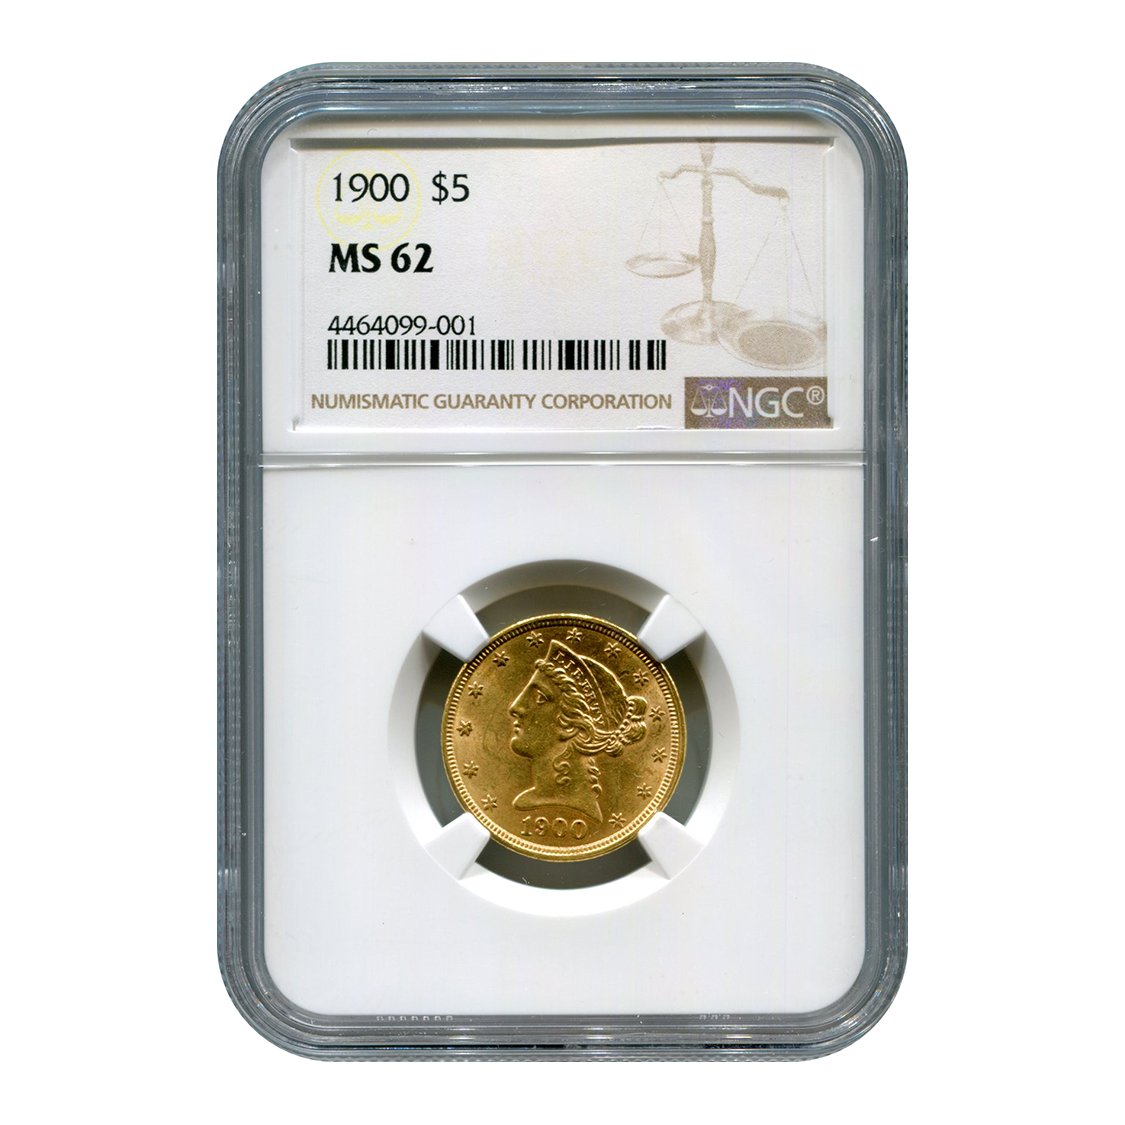 Certified US Gold $5 Liberty 1900 MS62 NGC